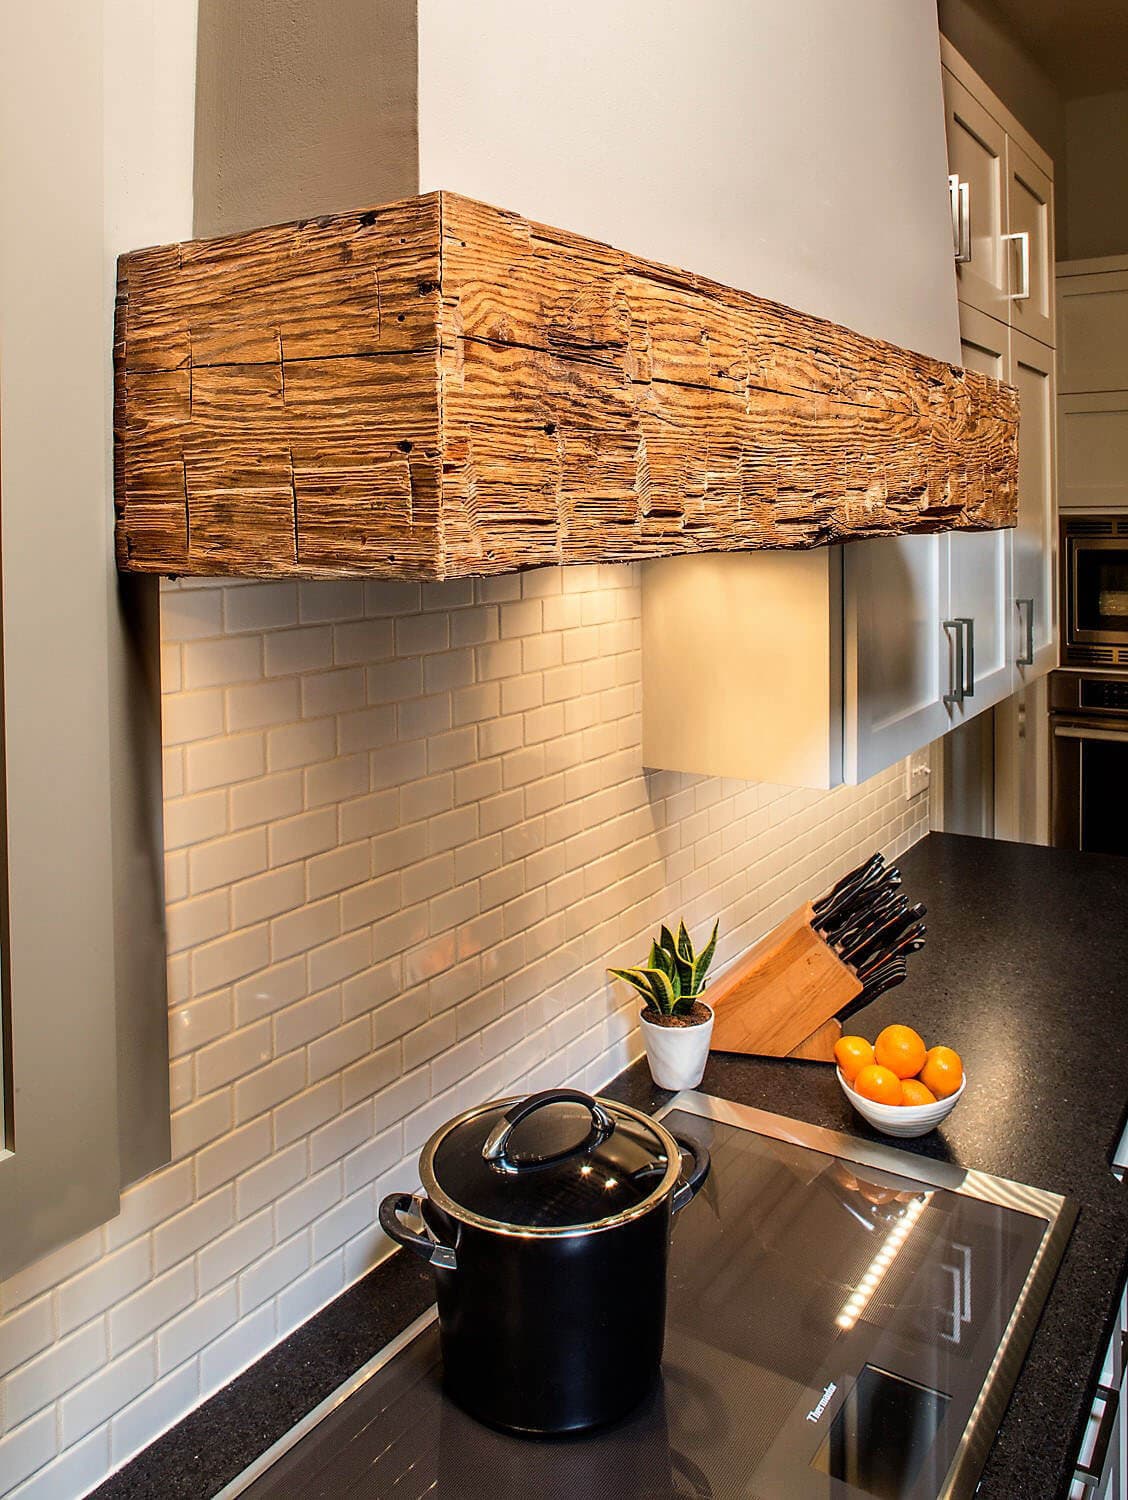 Reclaimed wood for custom crafted kitchen stove hood.